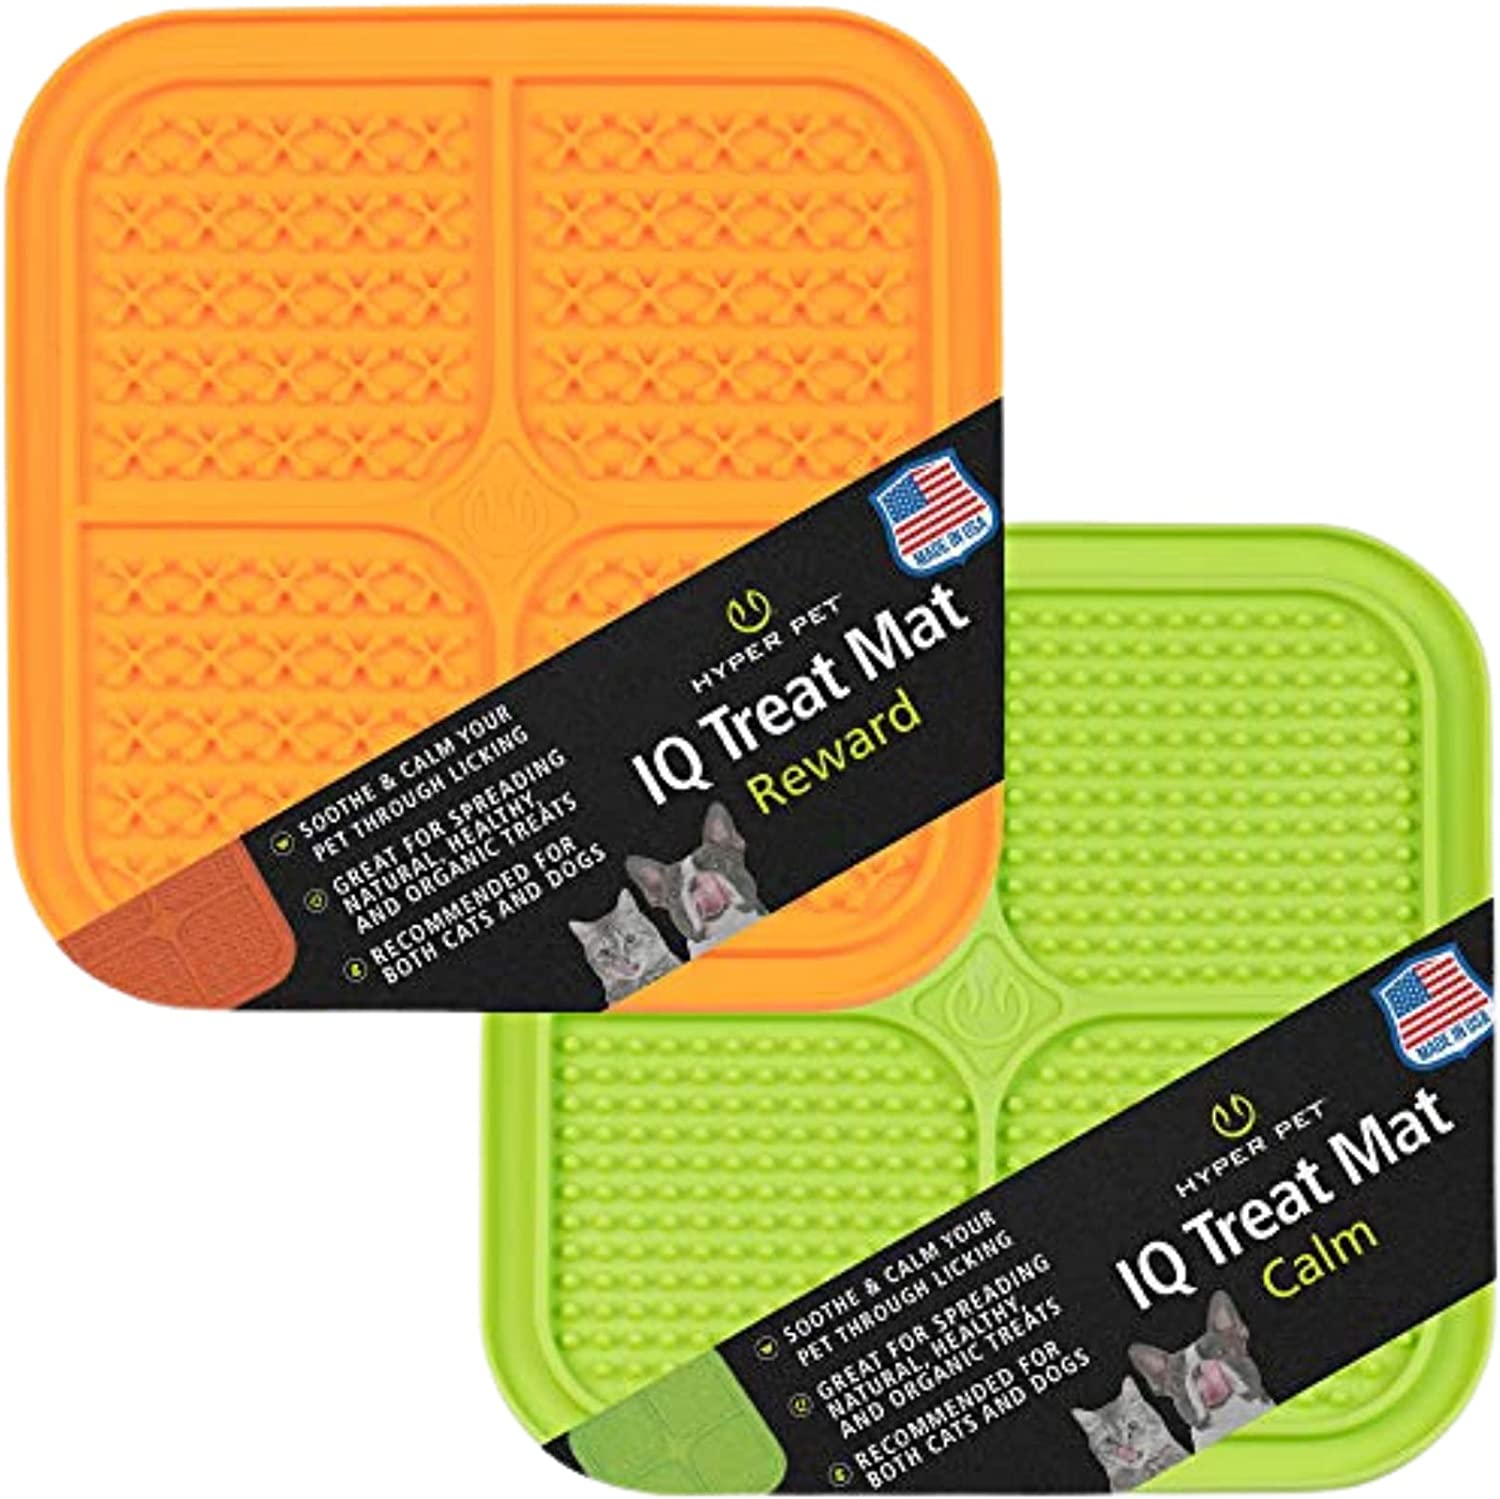 Set of two lick pads, one green one orange